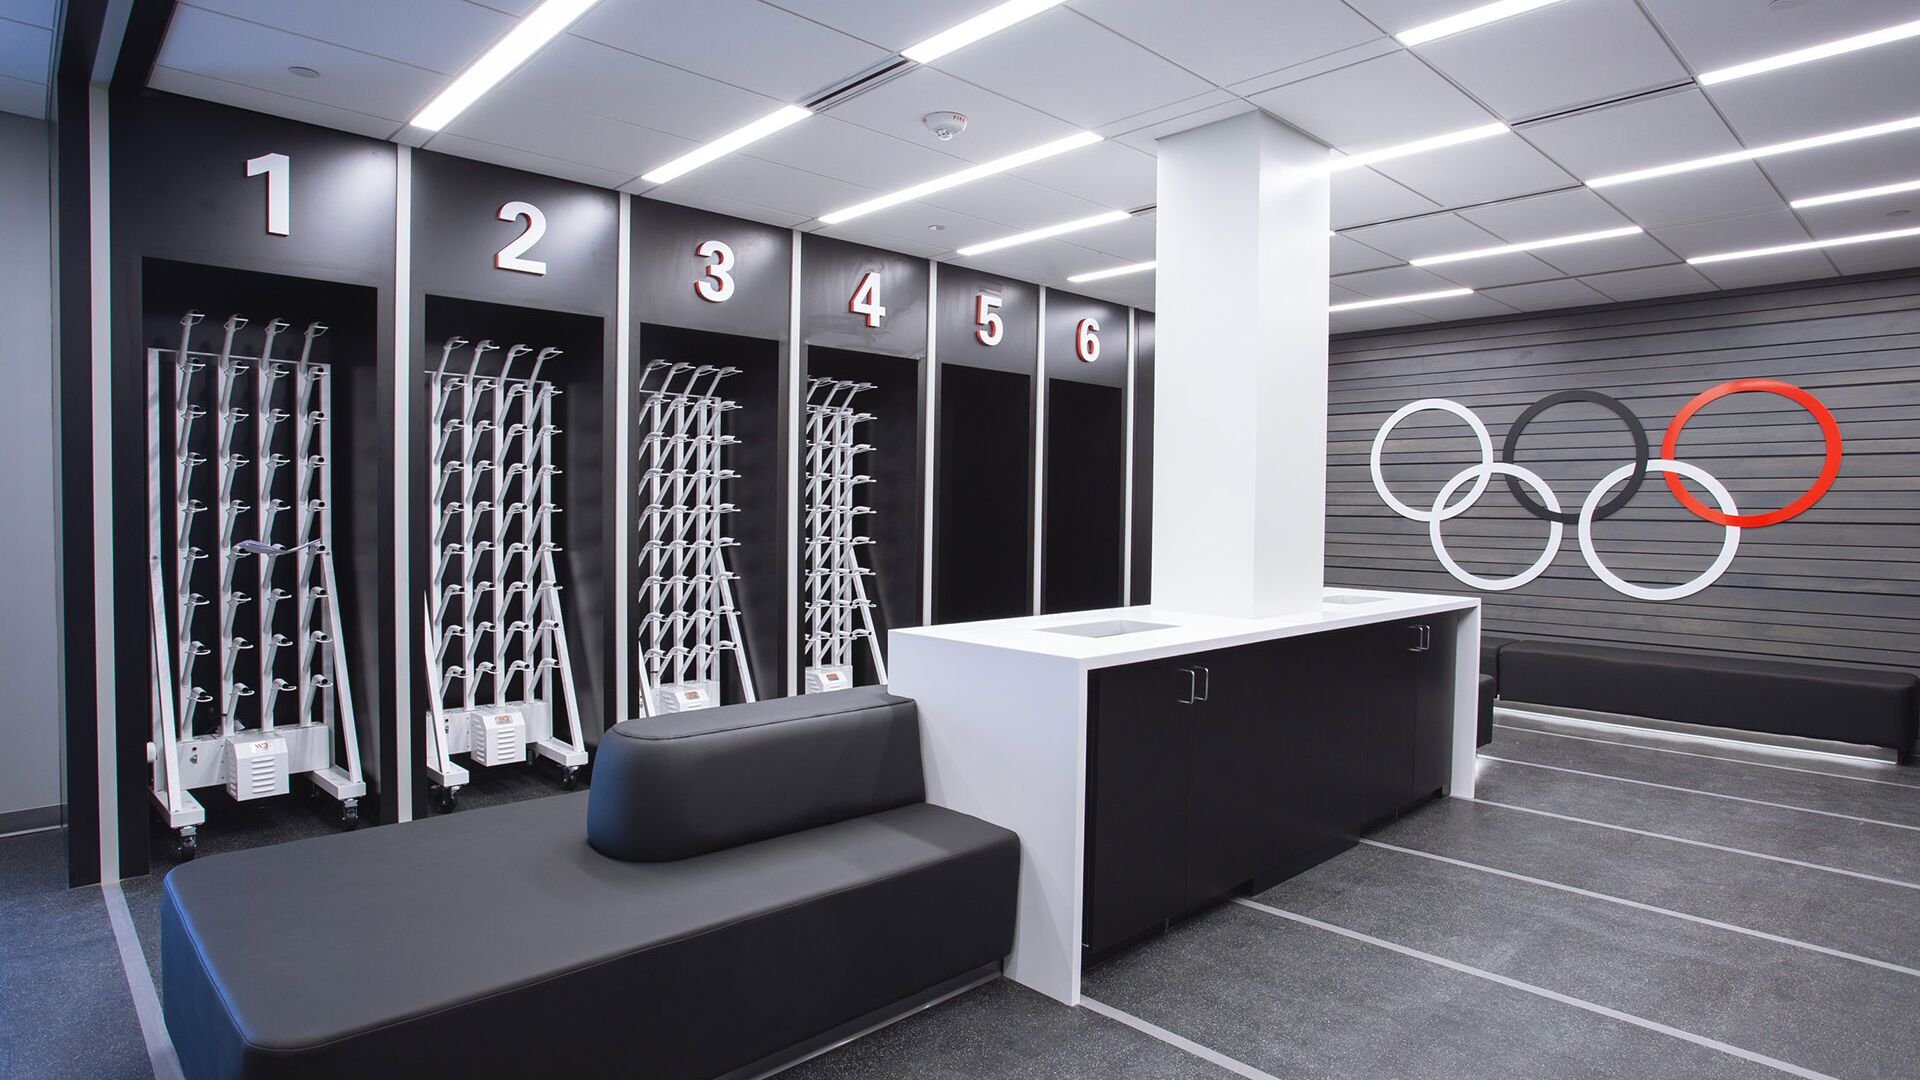 University of Georgia Track and Field Mudroom with Olympic Rings Logo